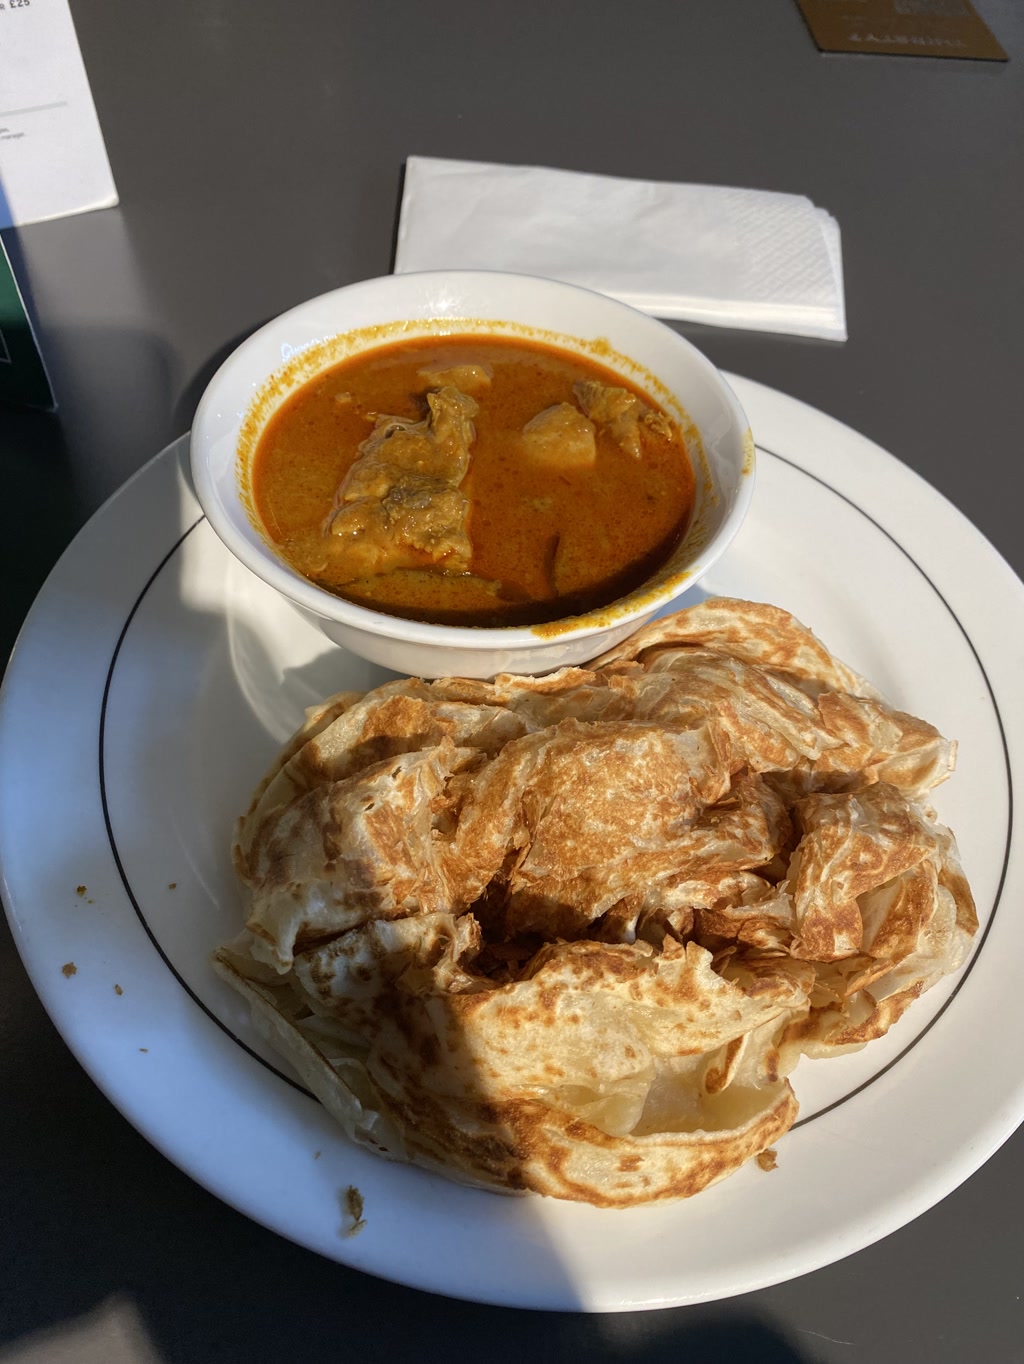 A bowl of curry with large pieces of meat is accompanied by a portion of flaky, layered flatbread on a white plate. The curry appears rich and vibrant with a reddish-orange color, indicating a blend of spices. The flatbread, known as roti canai or roti paratha, is golden brown with crisp, uneven surfaces, suggesting it is freshly pan-fried to achieve a combination of crunchy and soft textures. Both items are served on a dark tabletop, with a white napkin and a corner of a document or menu seen in the backdrop.